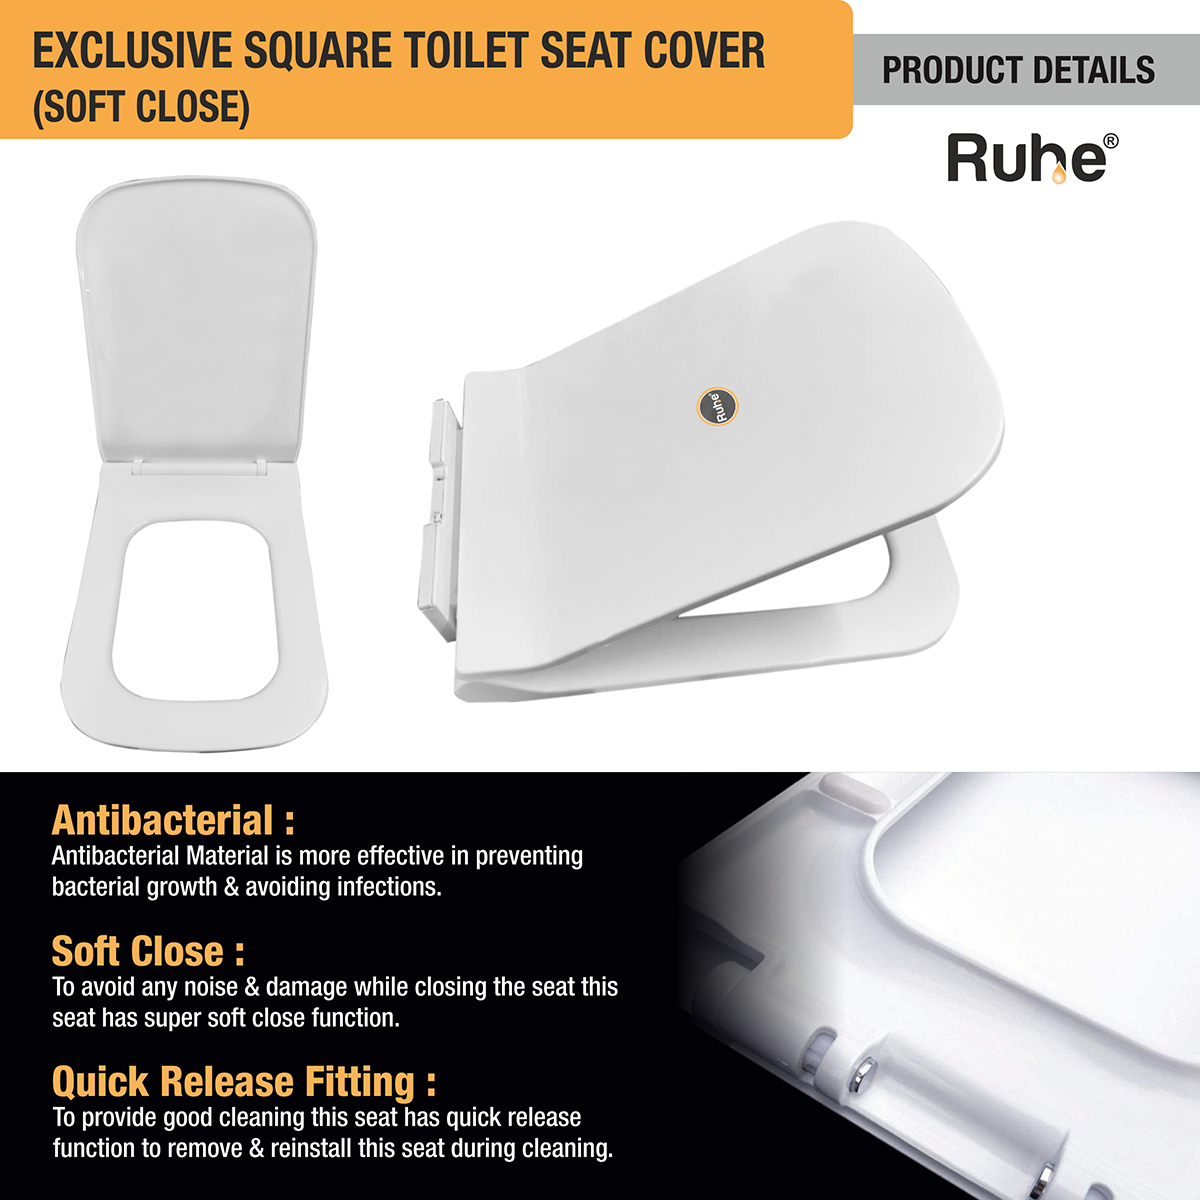 Exclusive Square Toilet Seat Cover (White) (Soft Close) product details